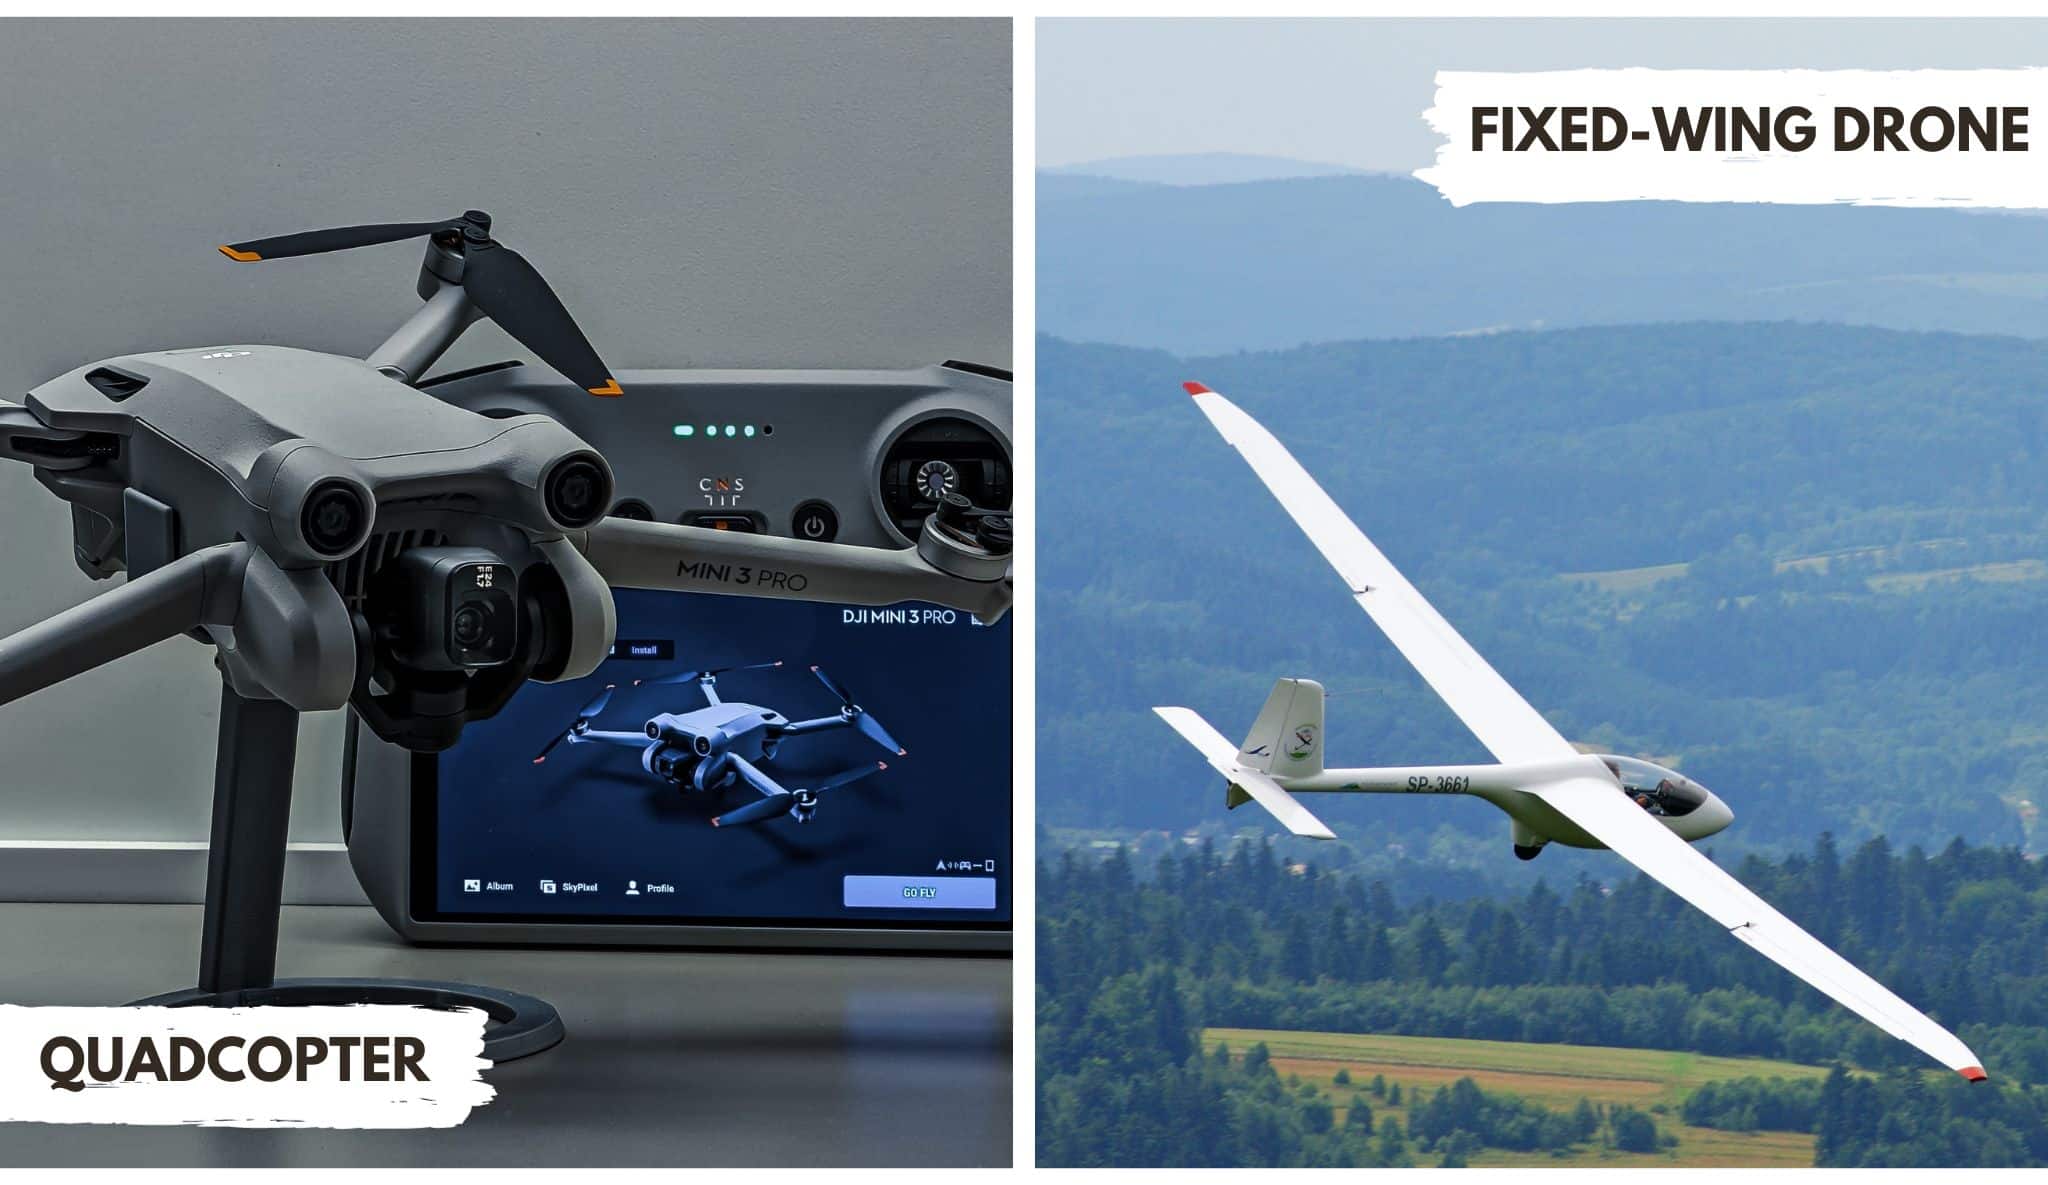 close-up images of a quadcopter and fixed-wing drone